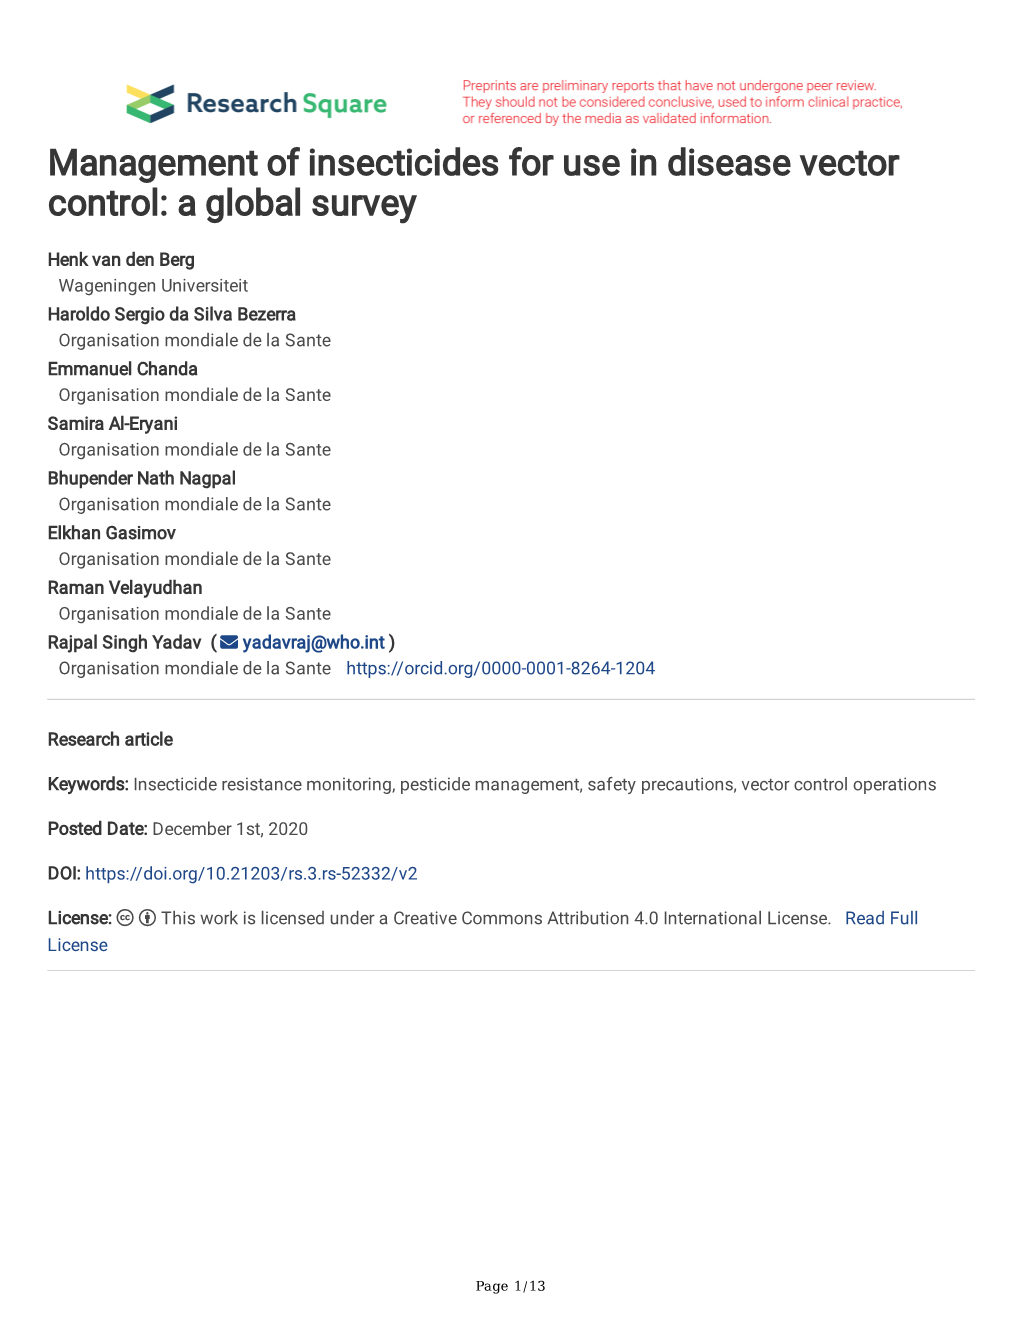 Management of Insecticides for Use in Disease Vector Control: a Global Survey